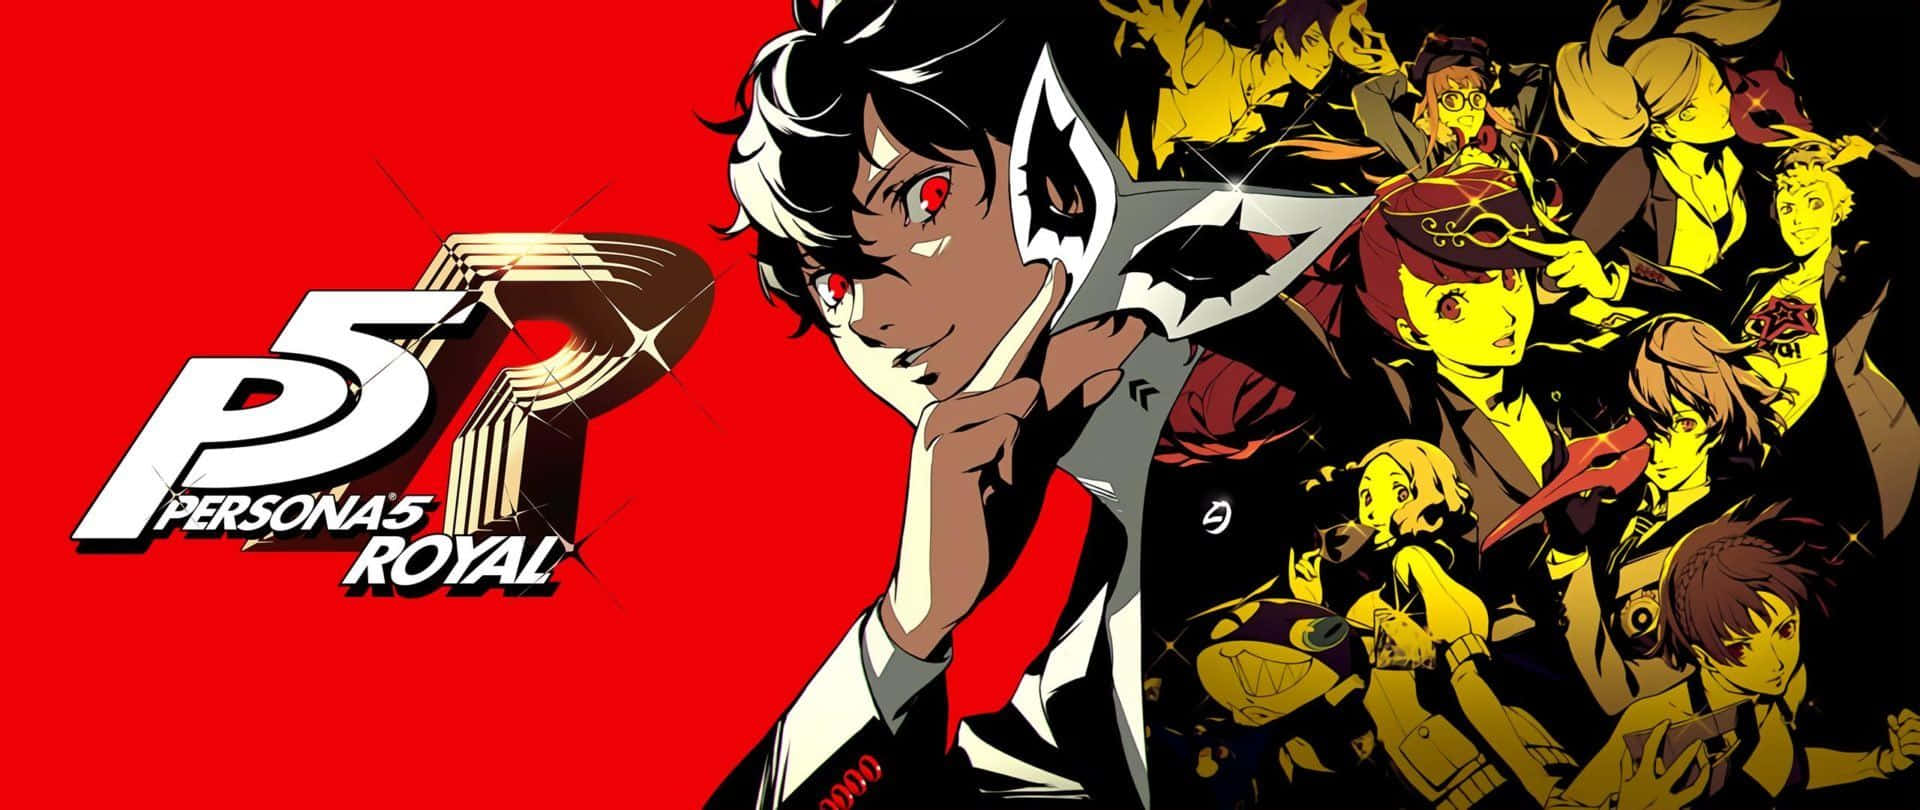 Ready to dive into the thrilling world of Persona 5?